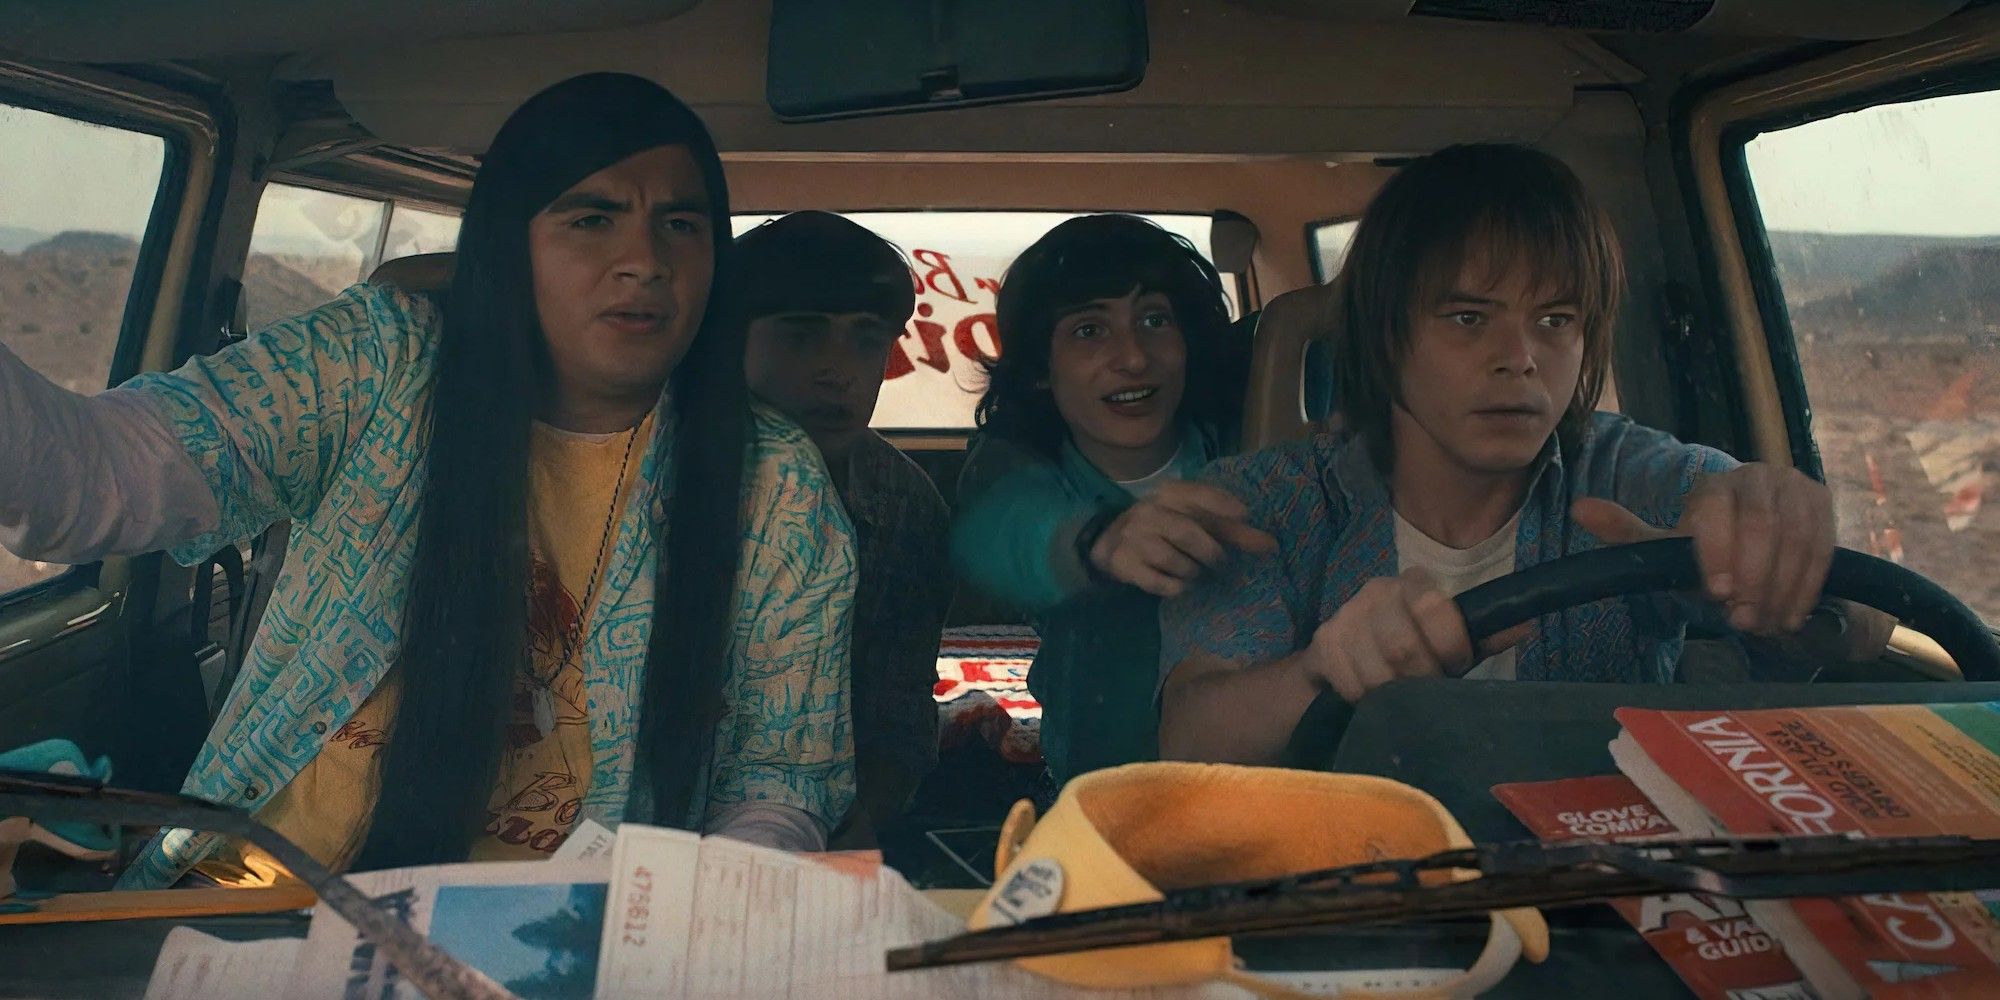 Argyle, Will, Mike, and Jonathan in Season 4 of Netflix's Stranger Things